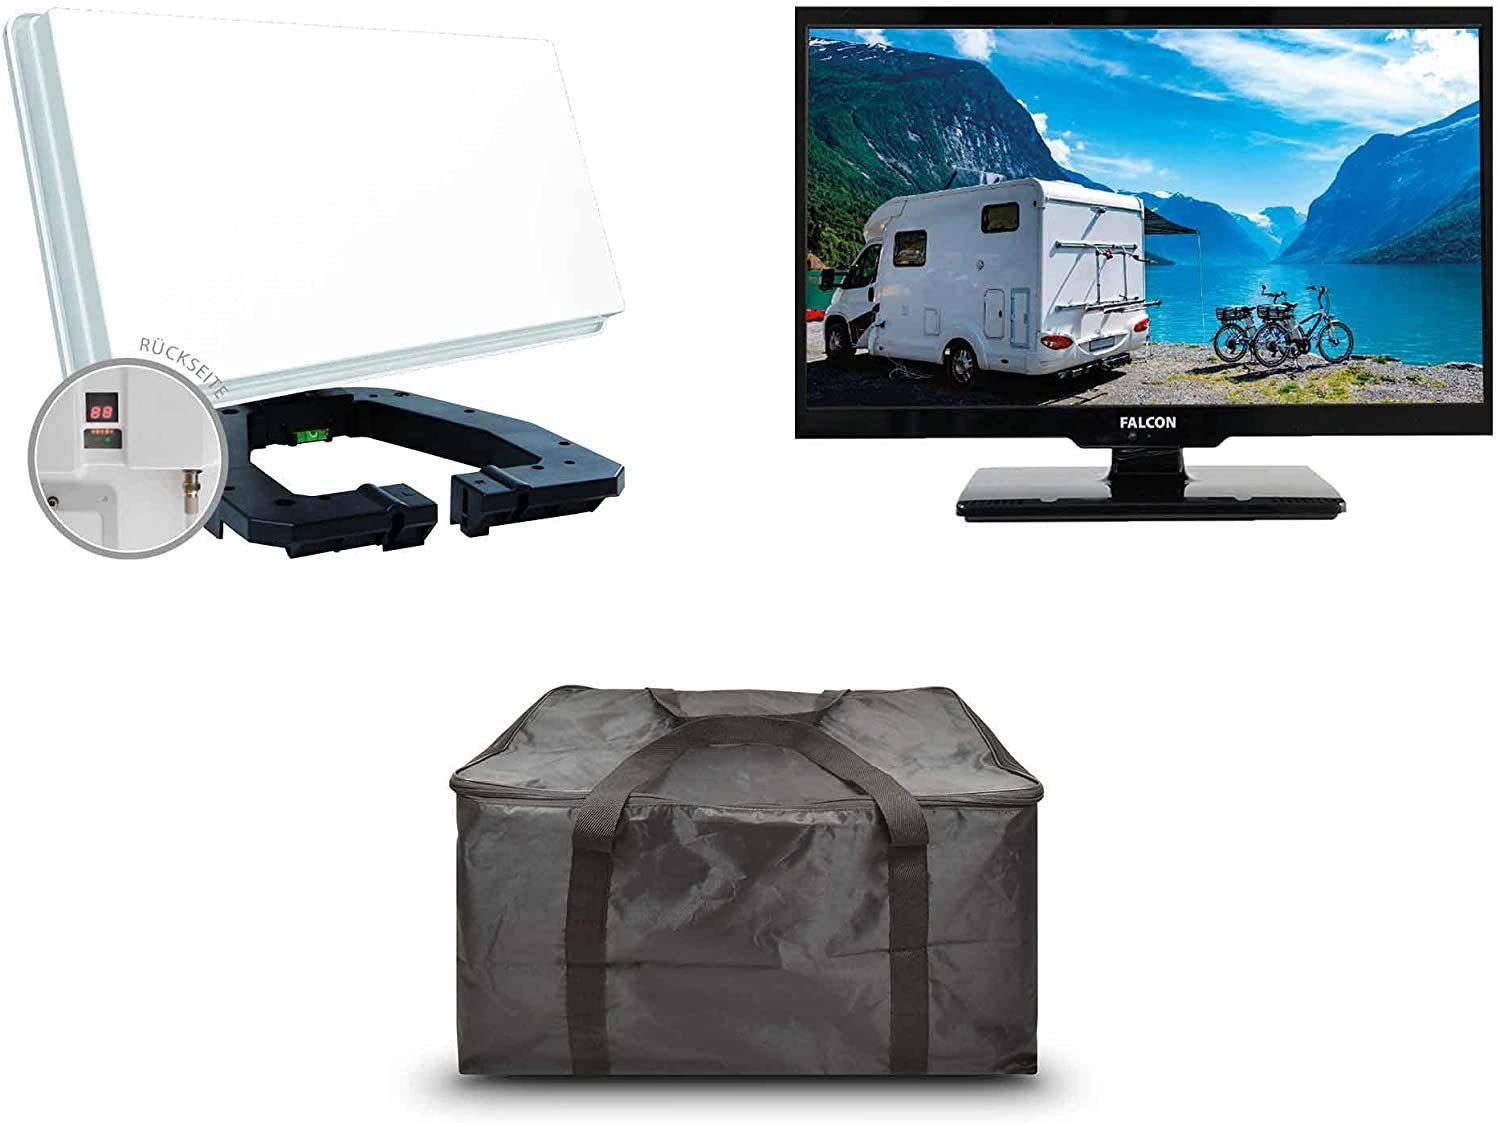 Camping II Traveller Falcon 19" Camping Kit TV Set (48,26 HDReady EasyFind Microelectronic cm, Sat-Anlage